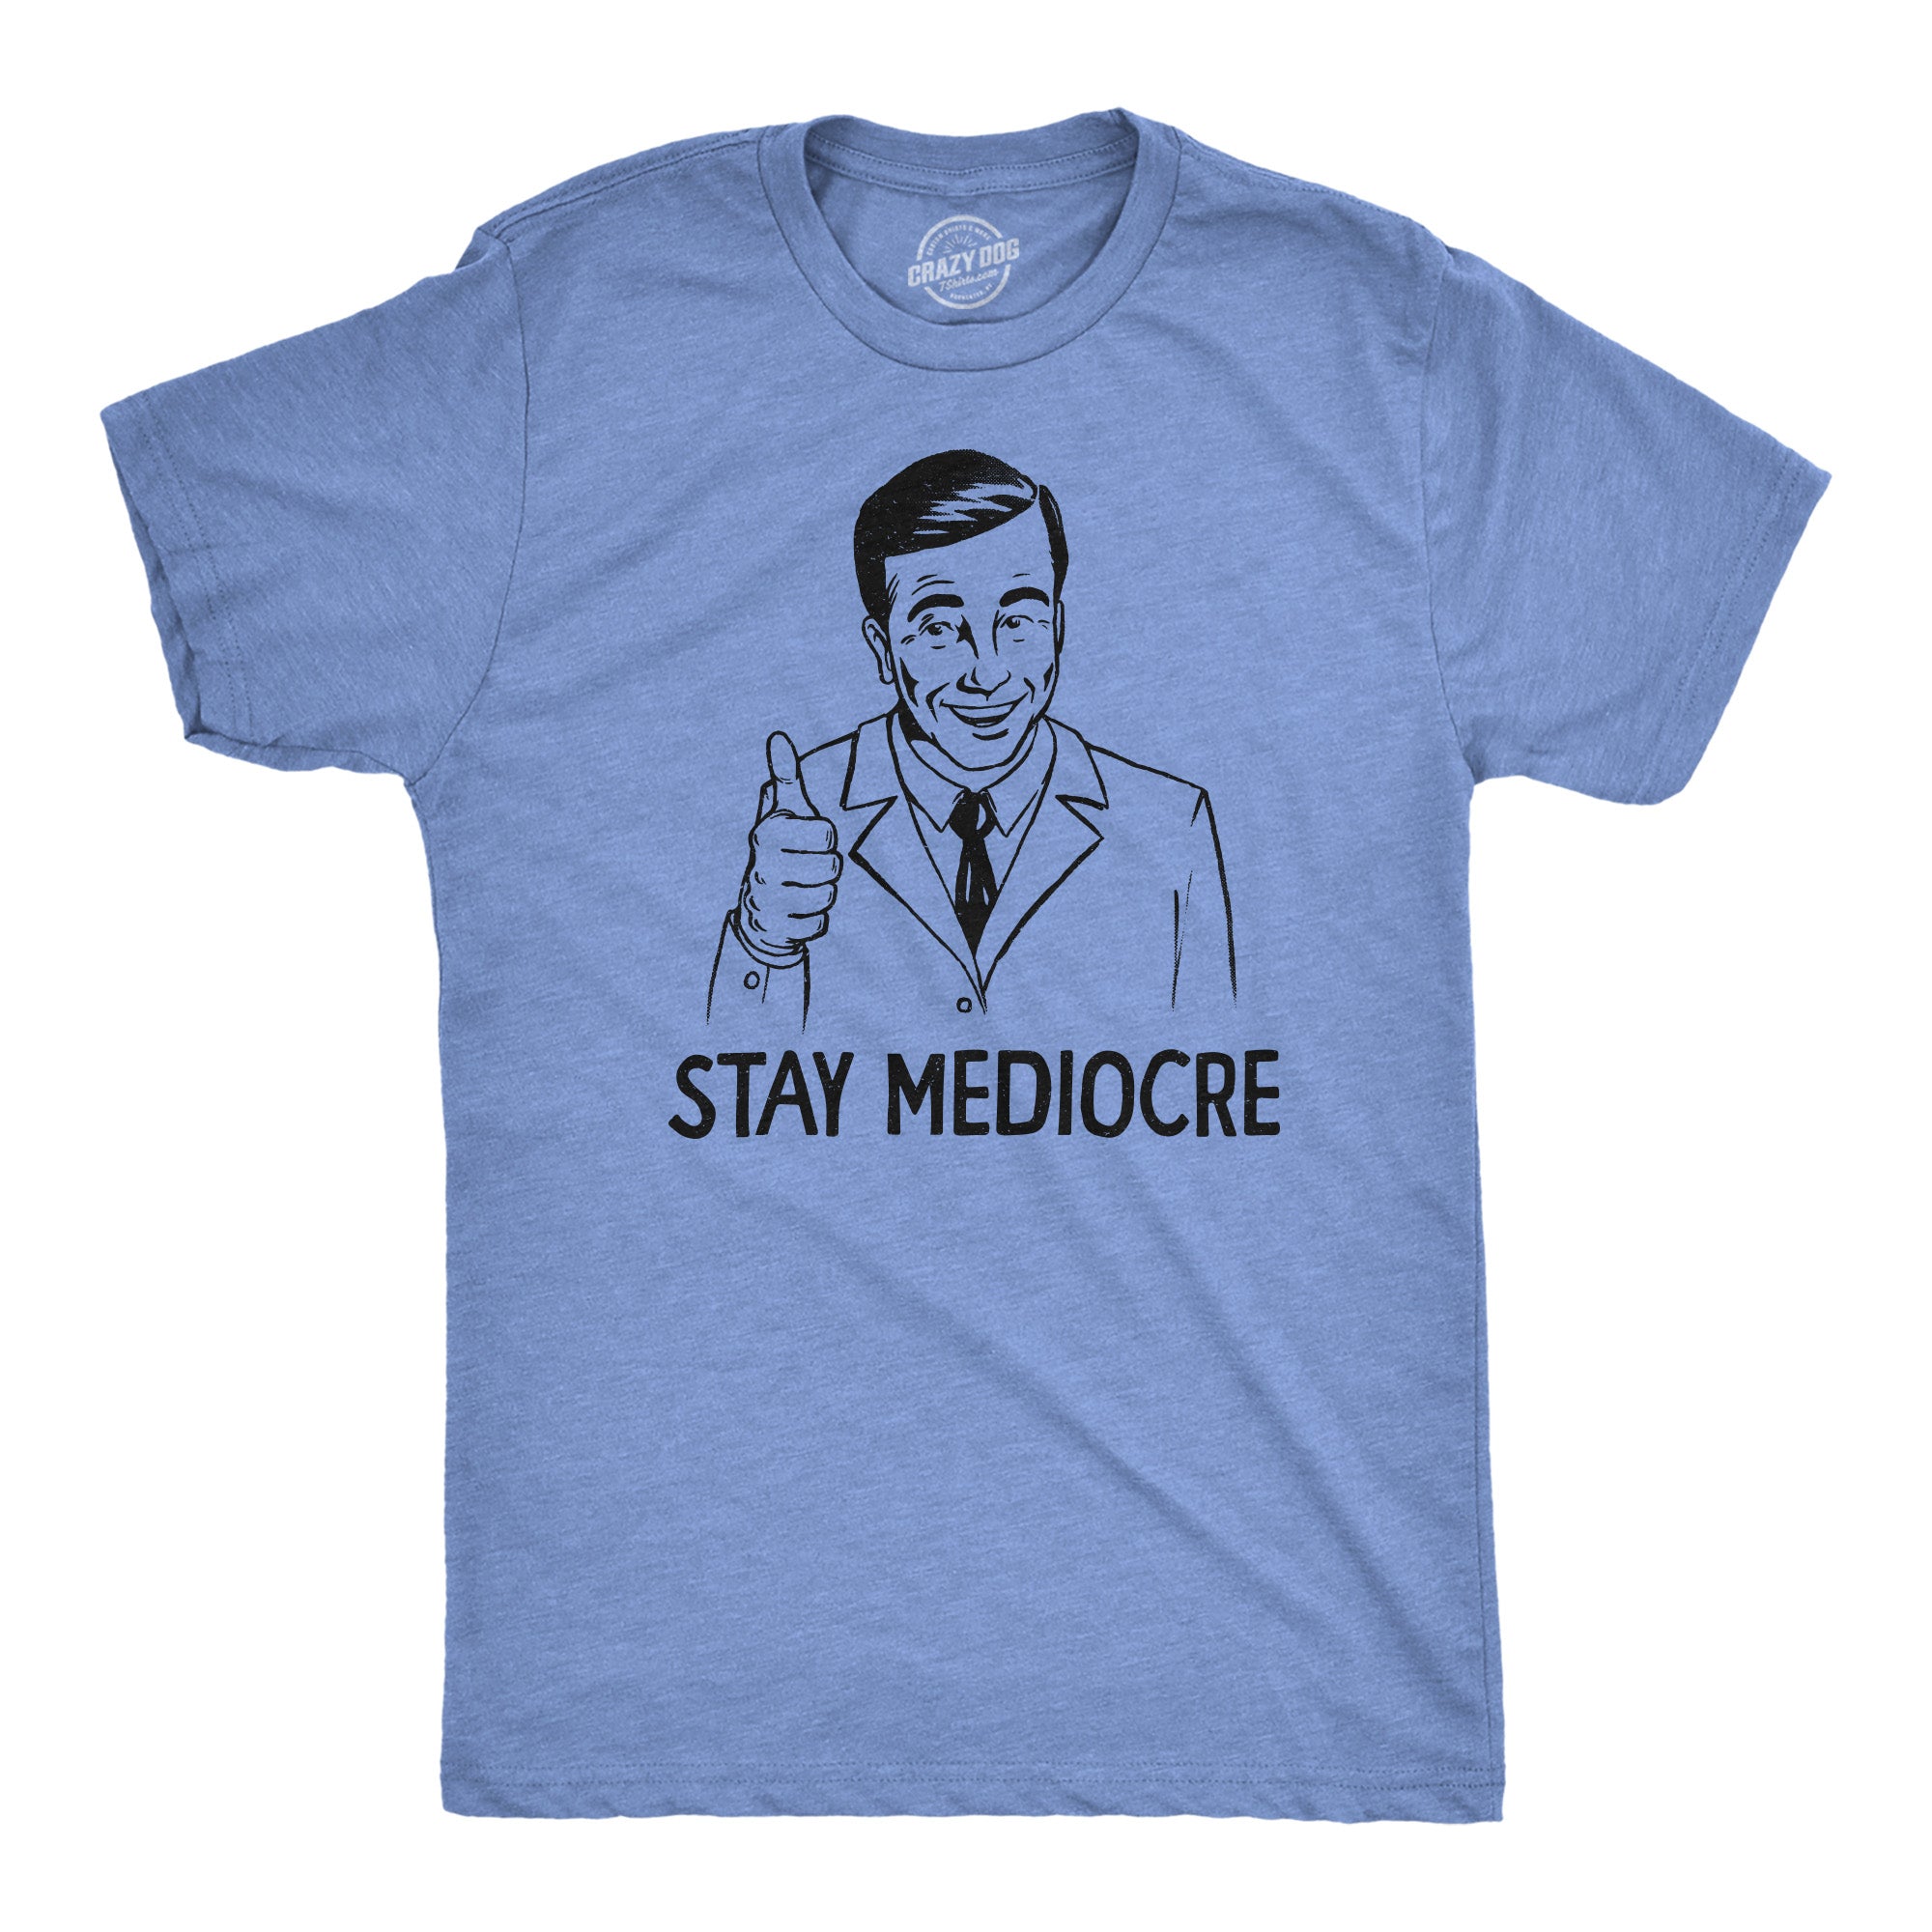 Funny Light Heather blue - MEDIOCRE Stay Mediocre Mens T Shirt Nerdy Sarcastic Tee